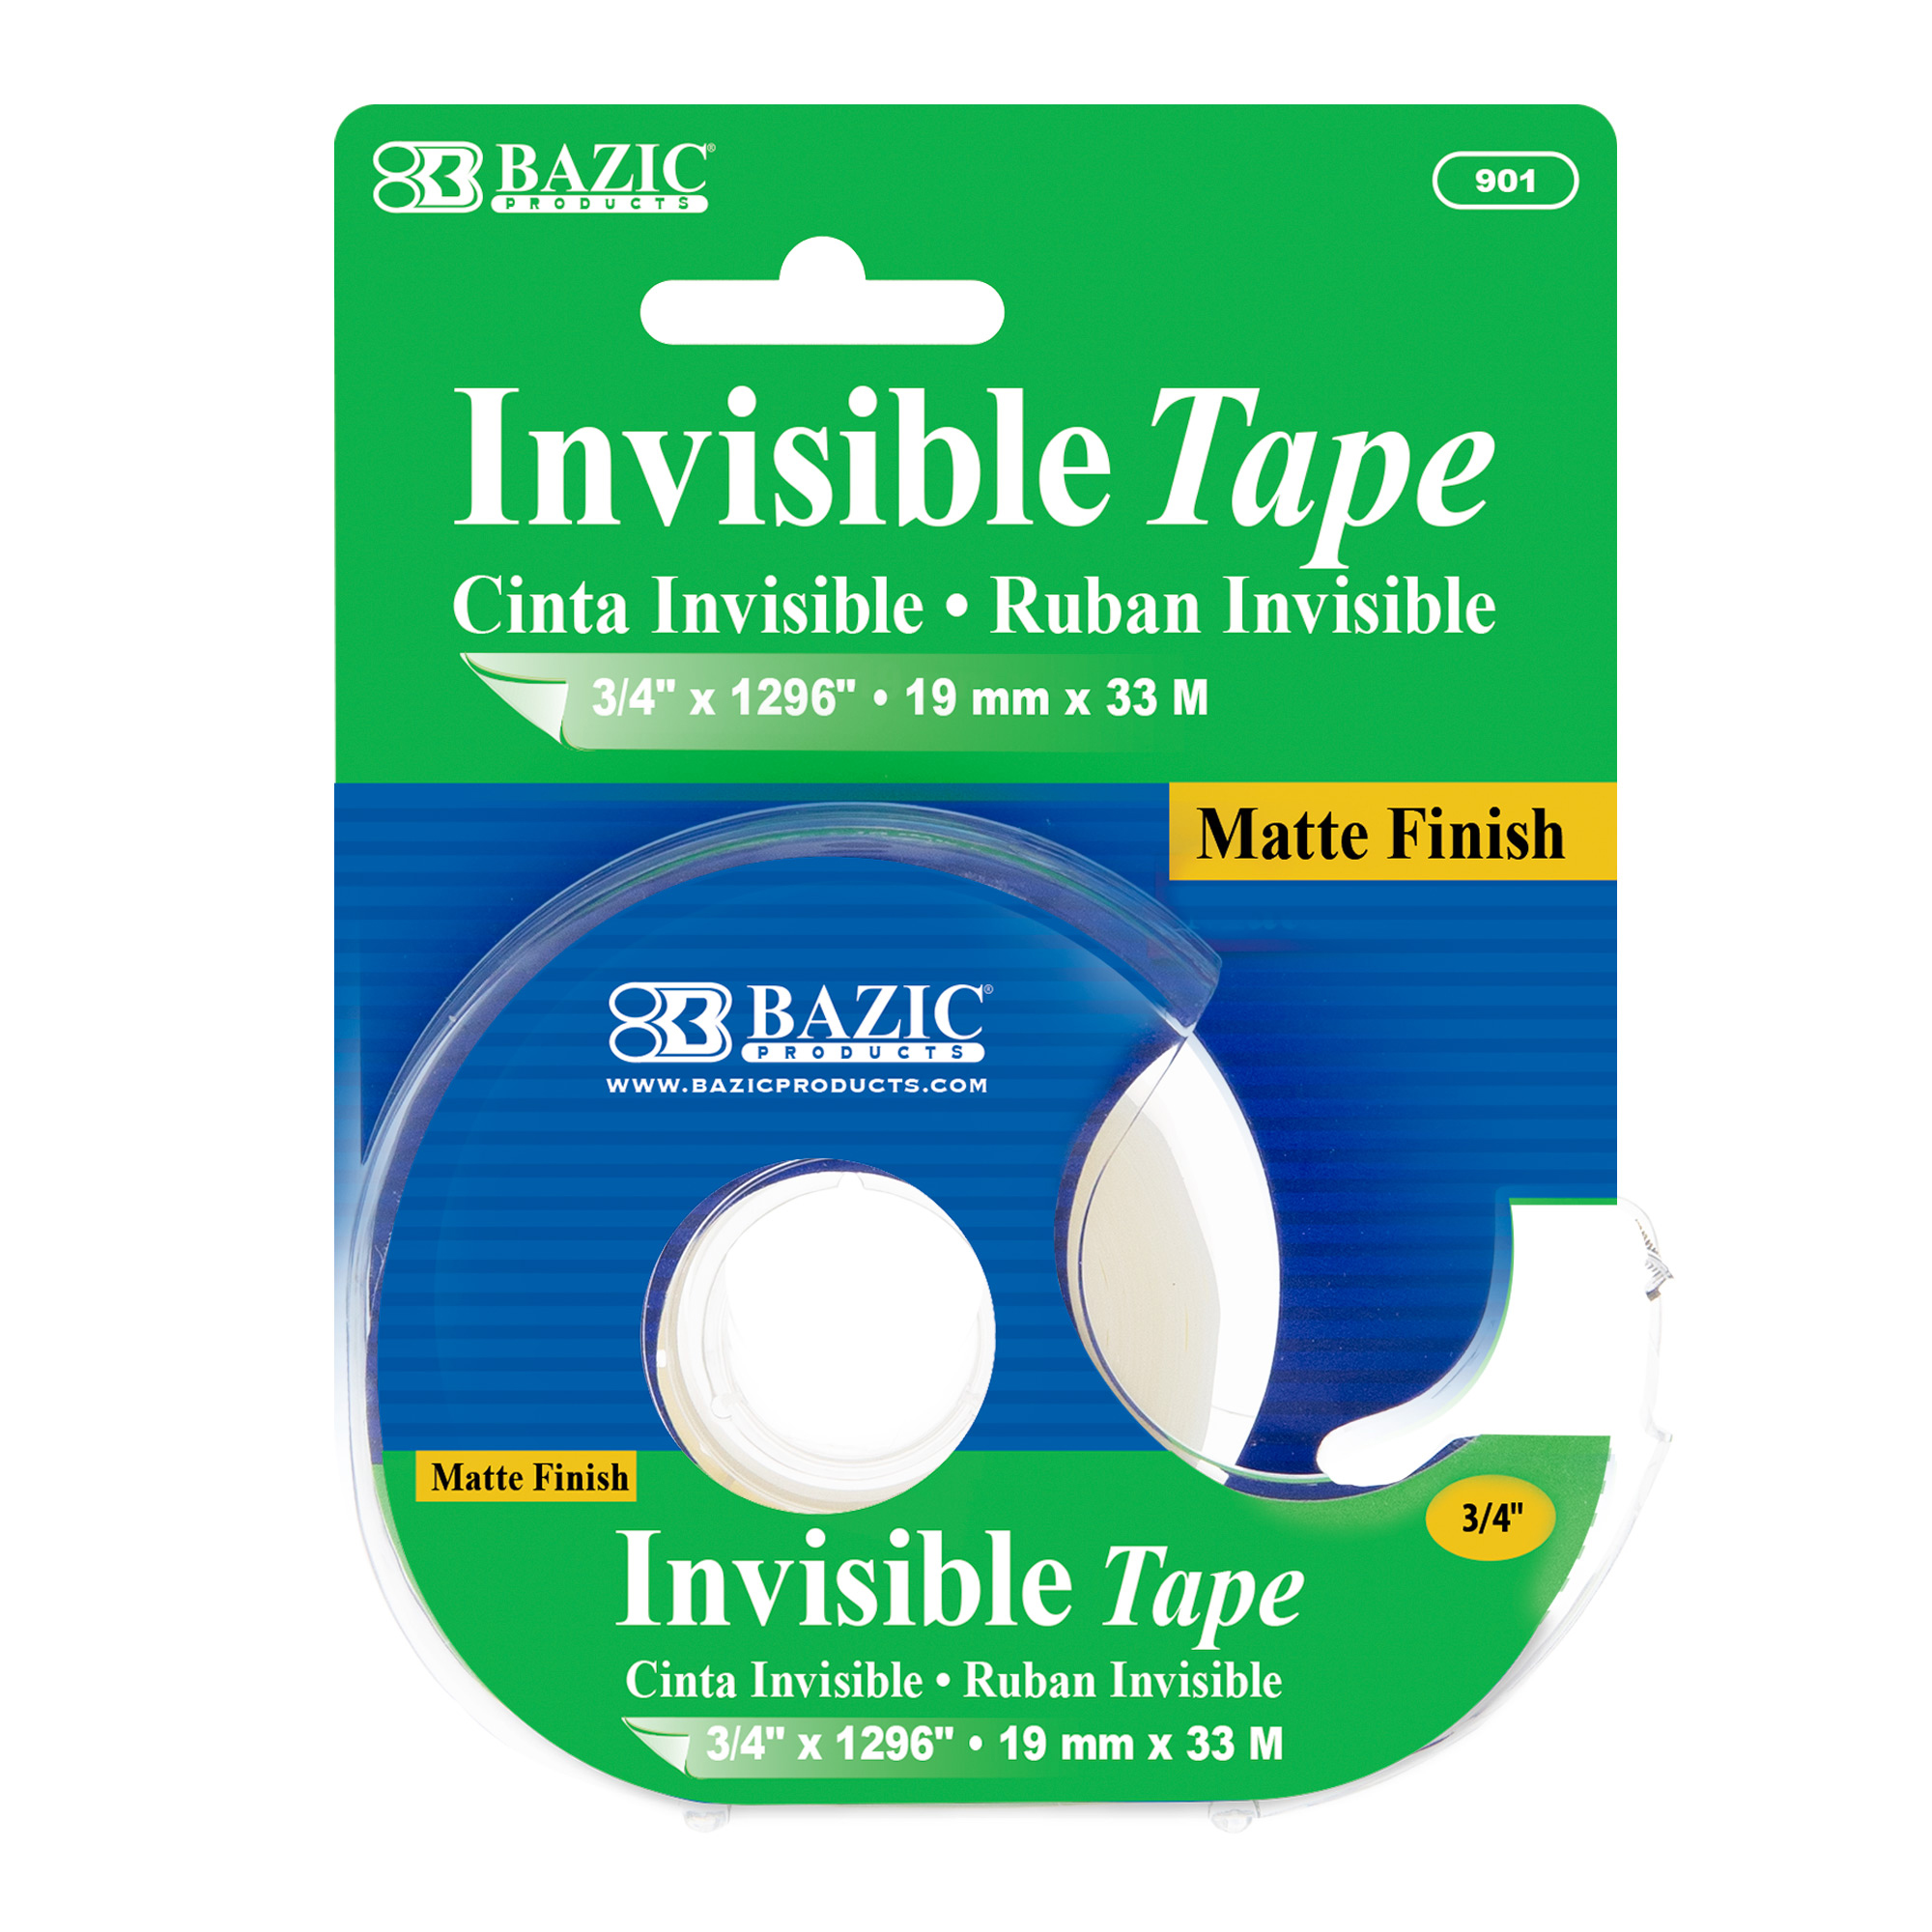 Staples Invisible Tape 3/4 x 1296 in 6 #52380 QTY 